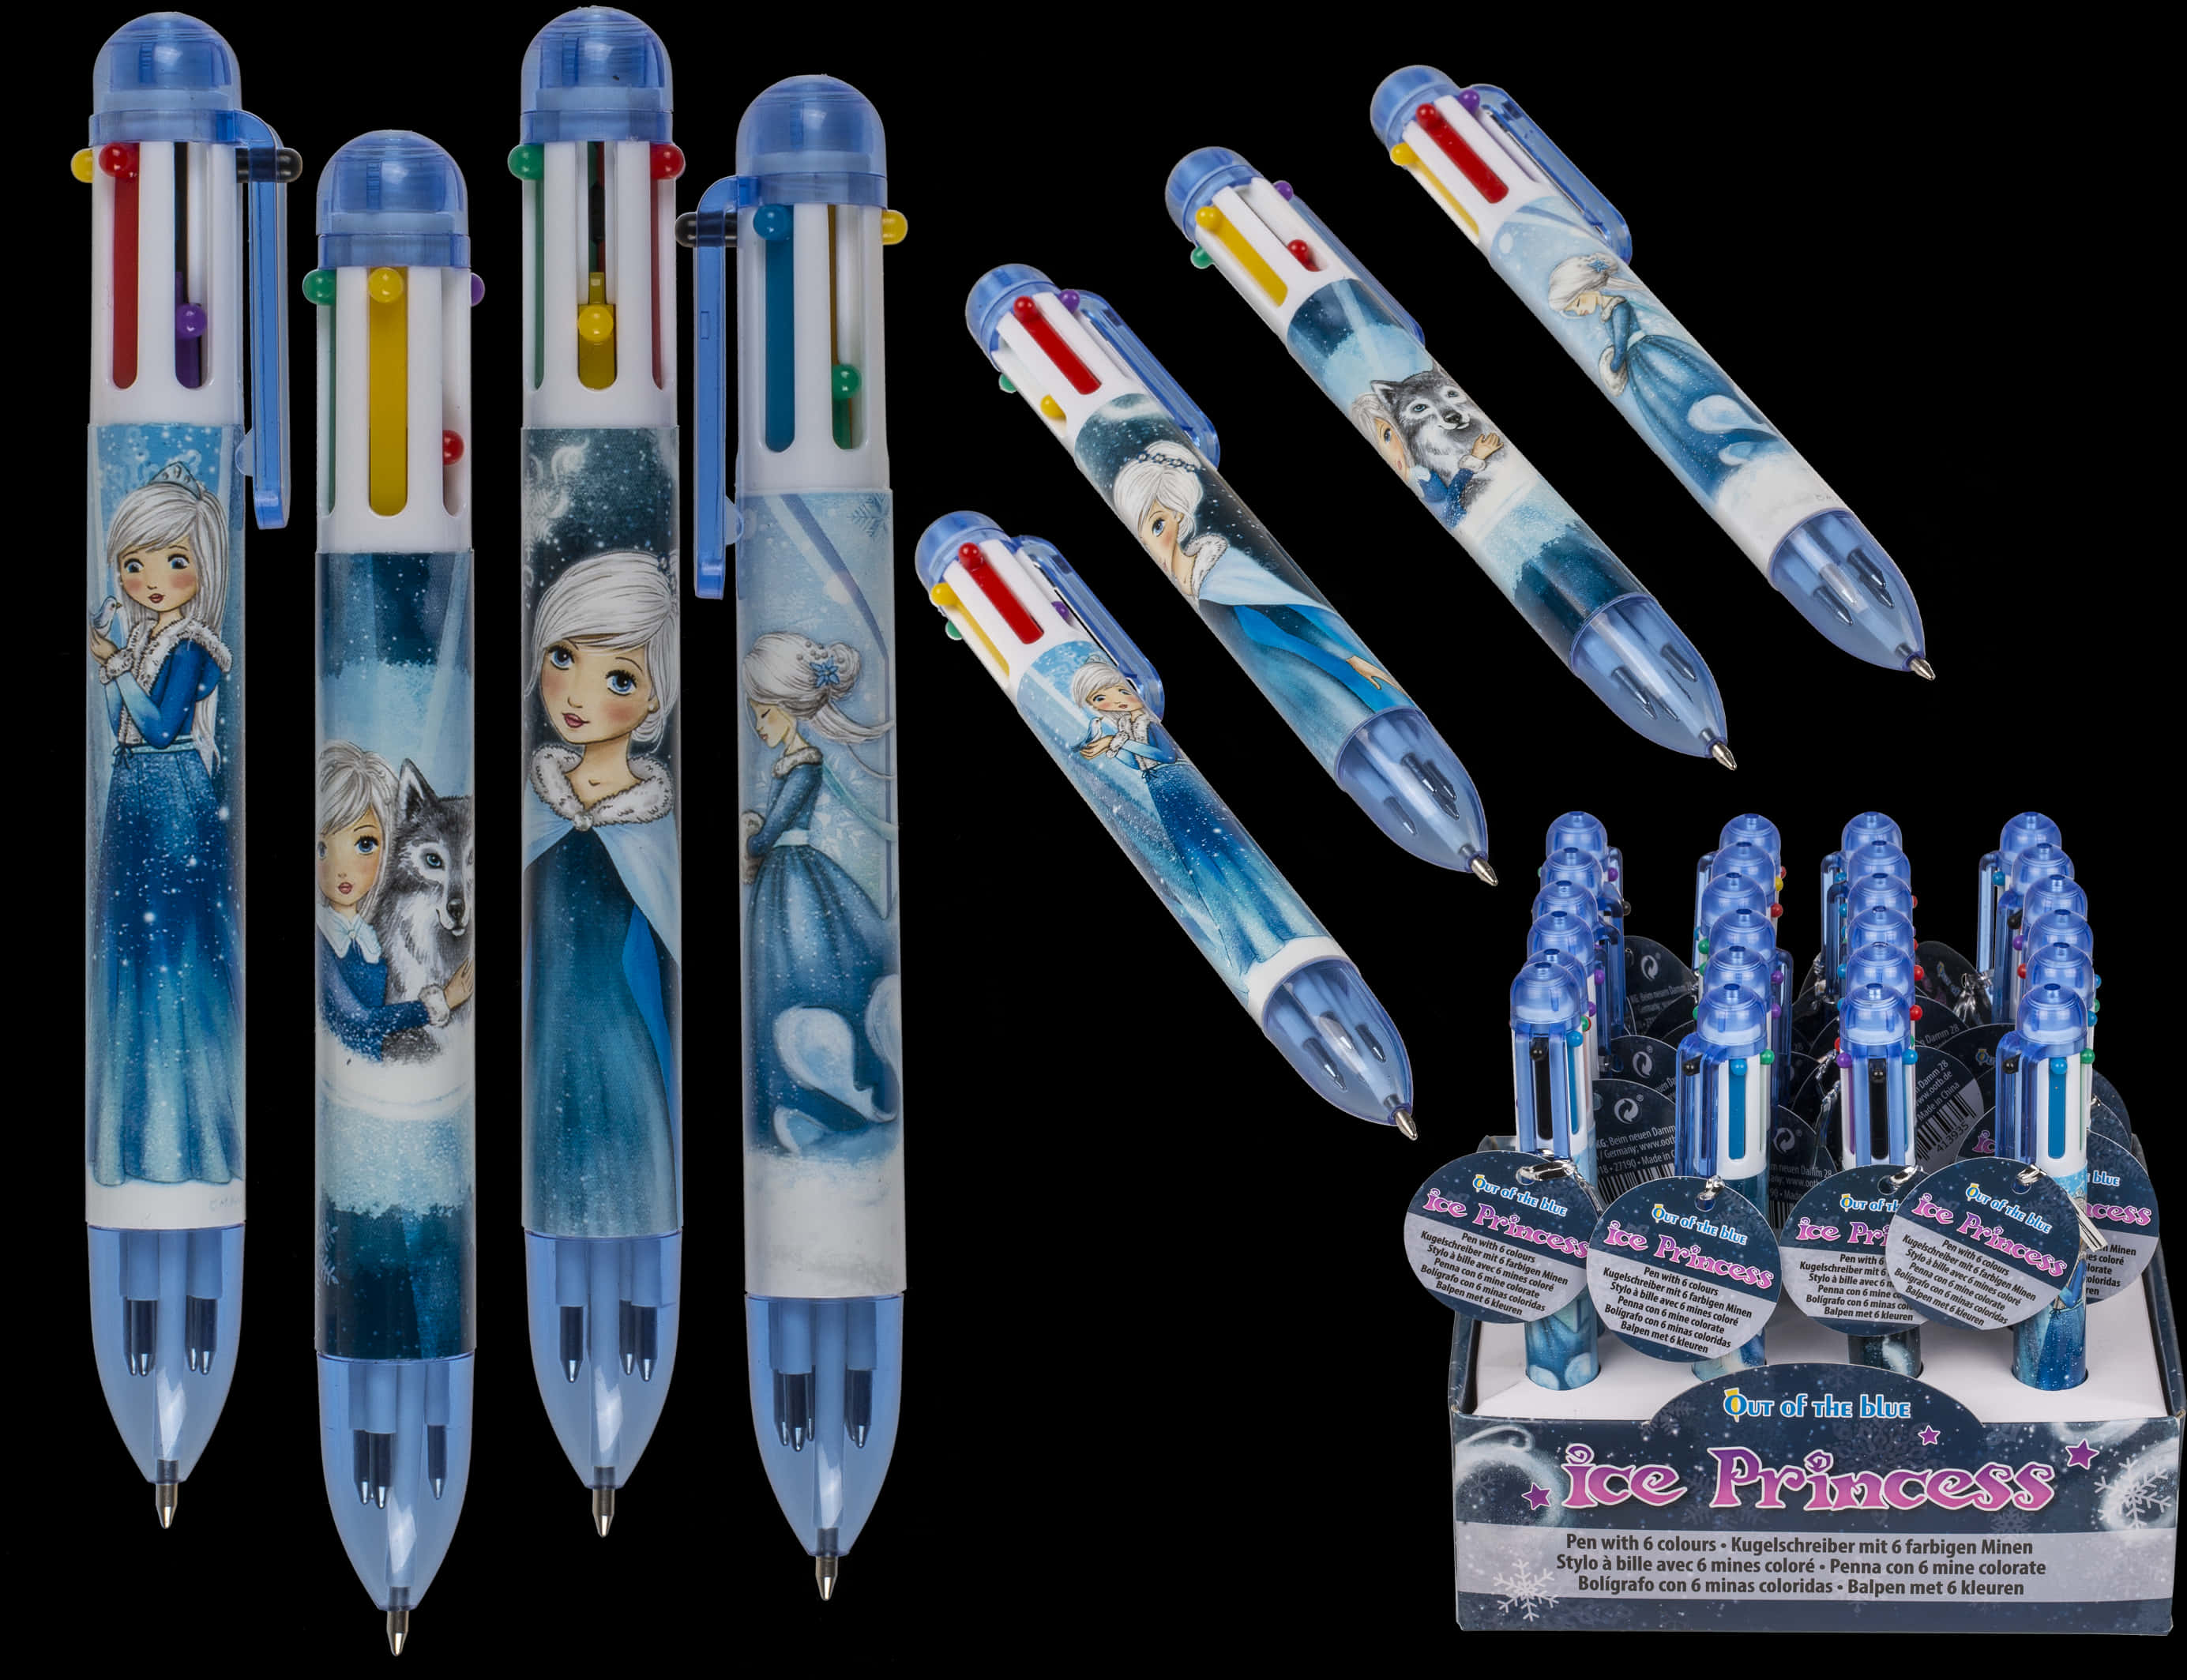 A Group Of Pens With A Picture Of A Cartoon Character